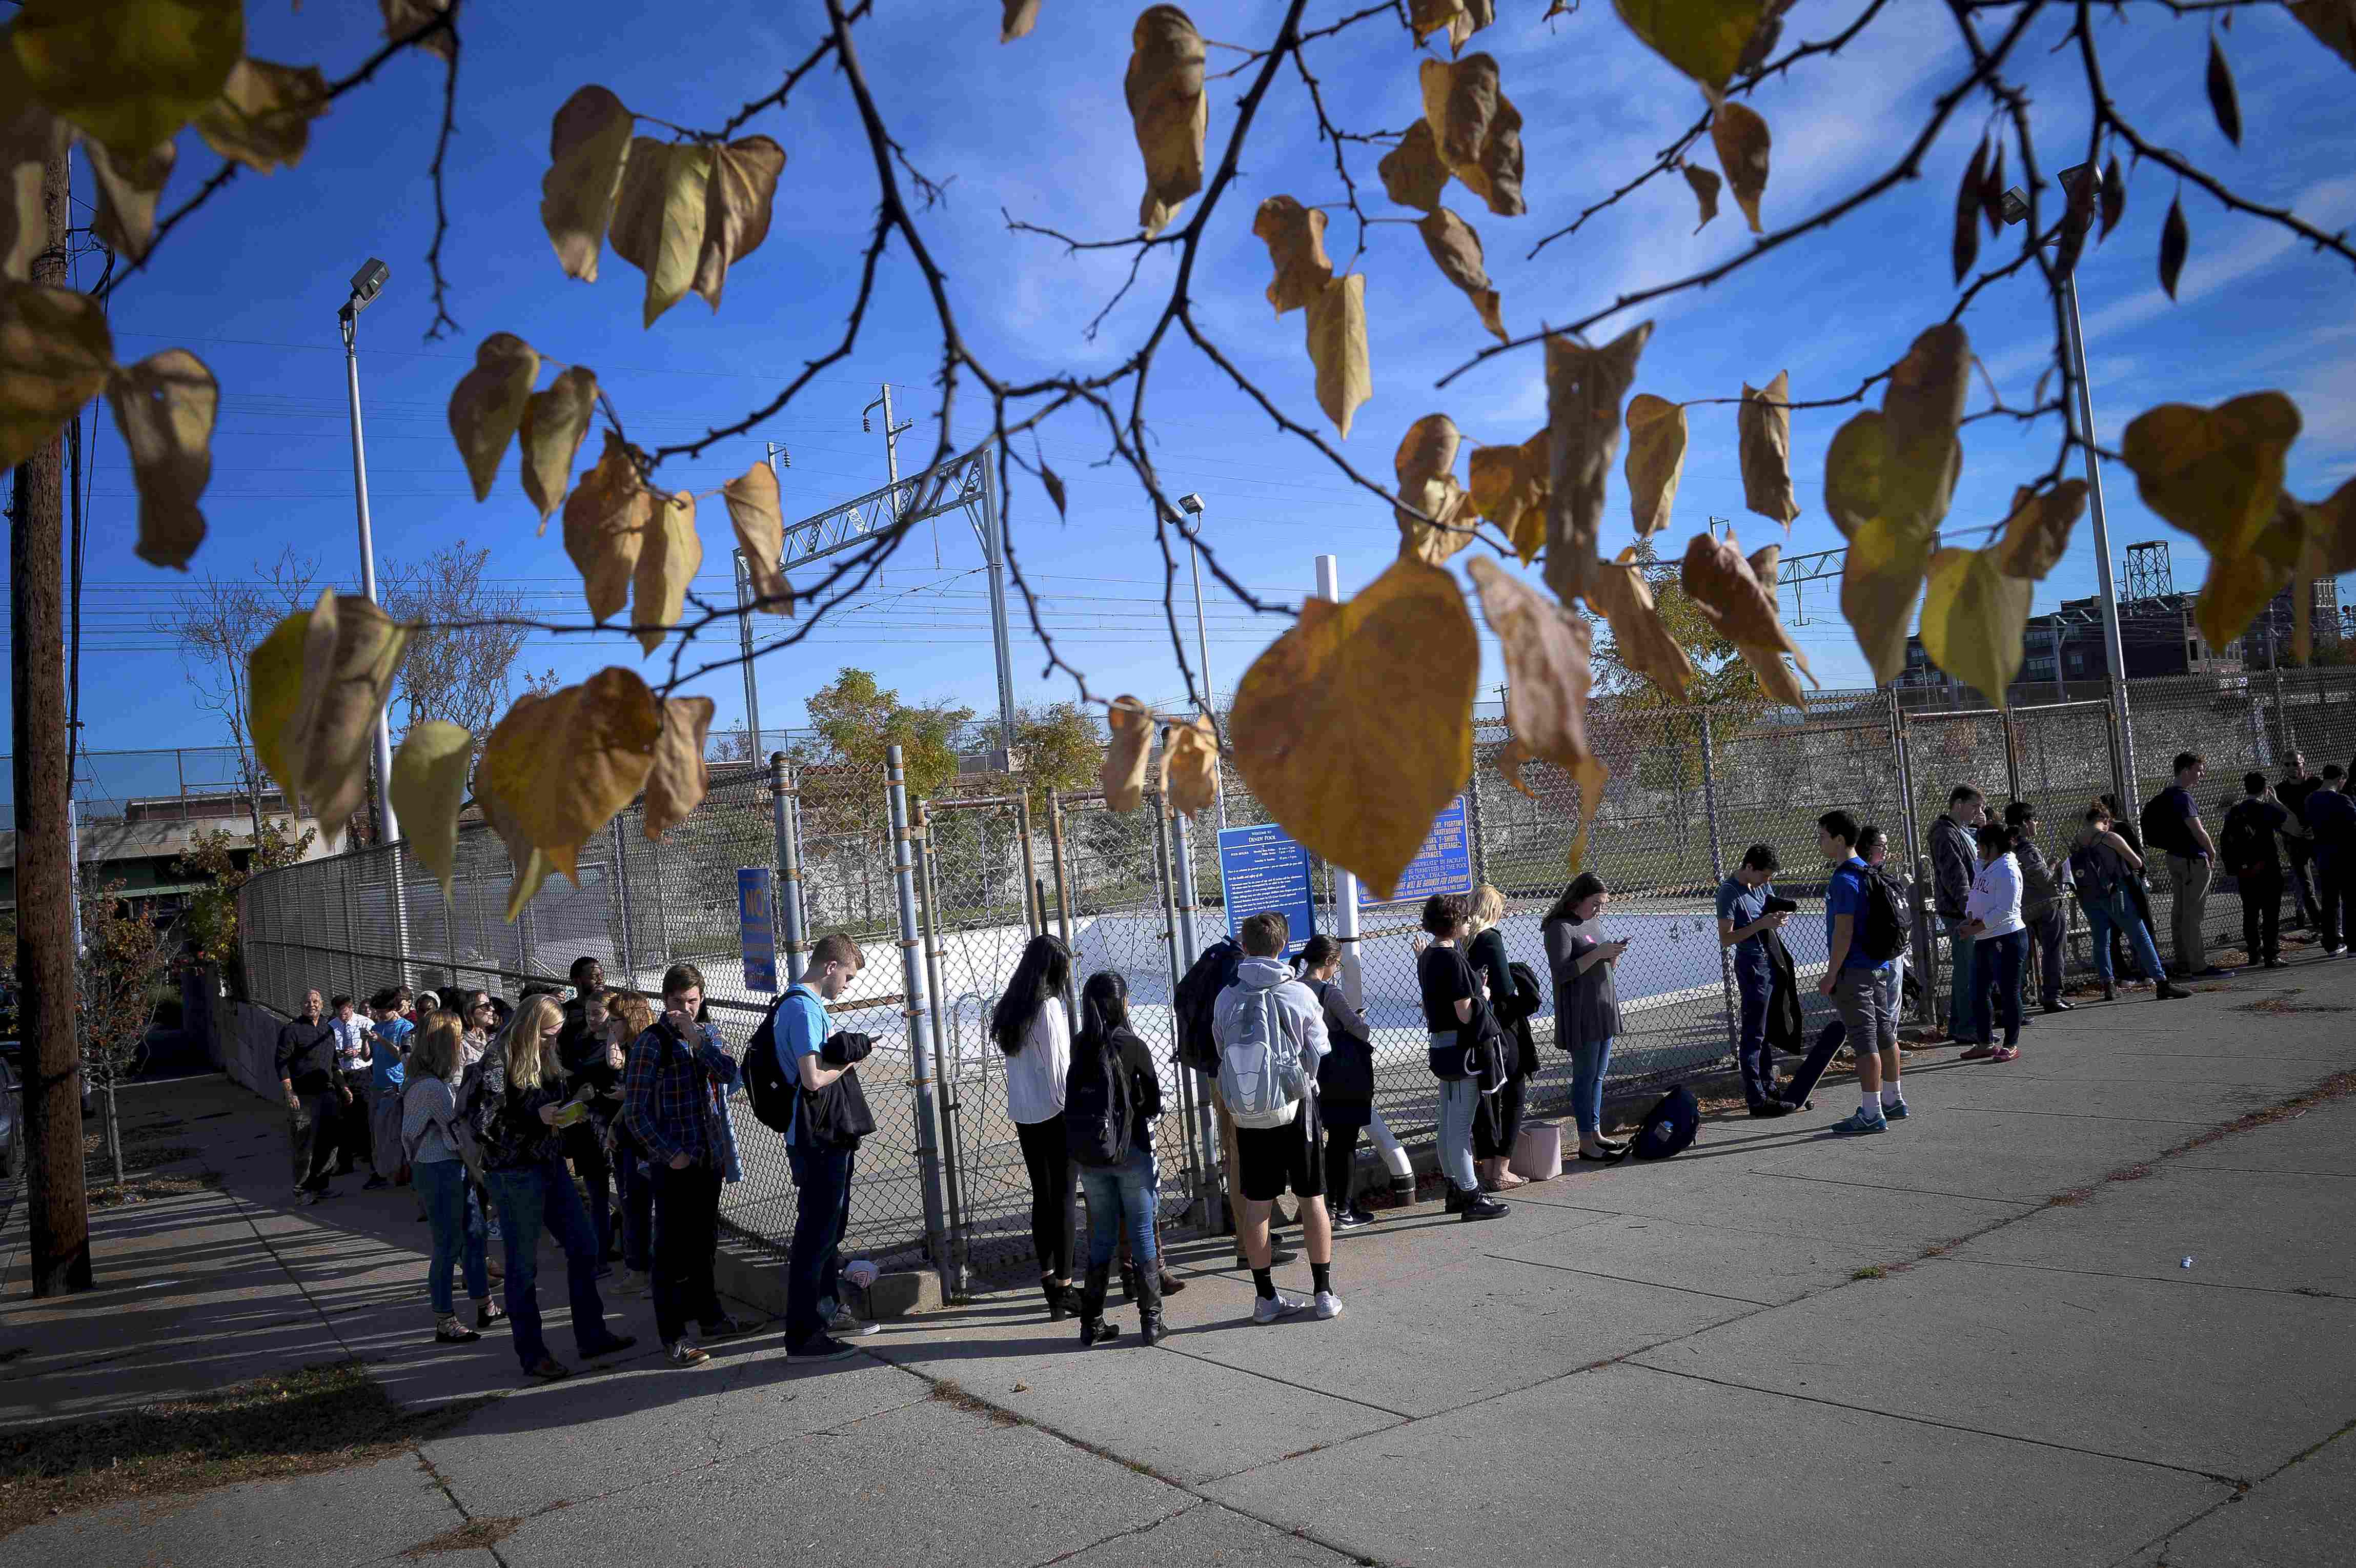 Hundreds of Temple University students wait in an hour-long line to vote during the U.S. presidential election in Philadelphia, Pennsylvania, U.S. November 8, 2016. REUTERS/Charles Mostollern